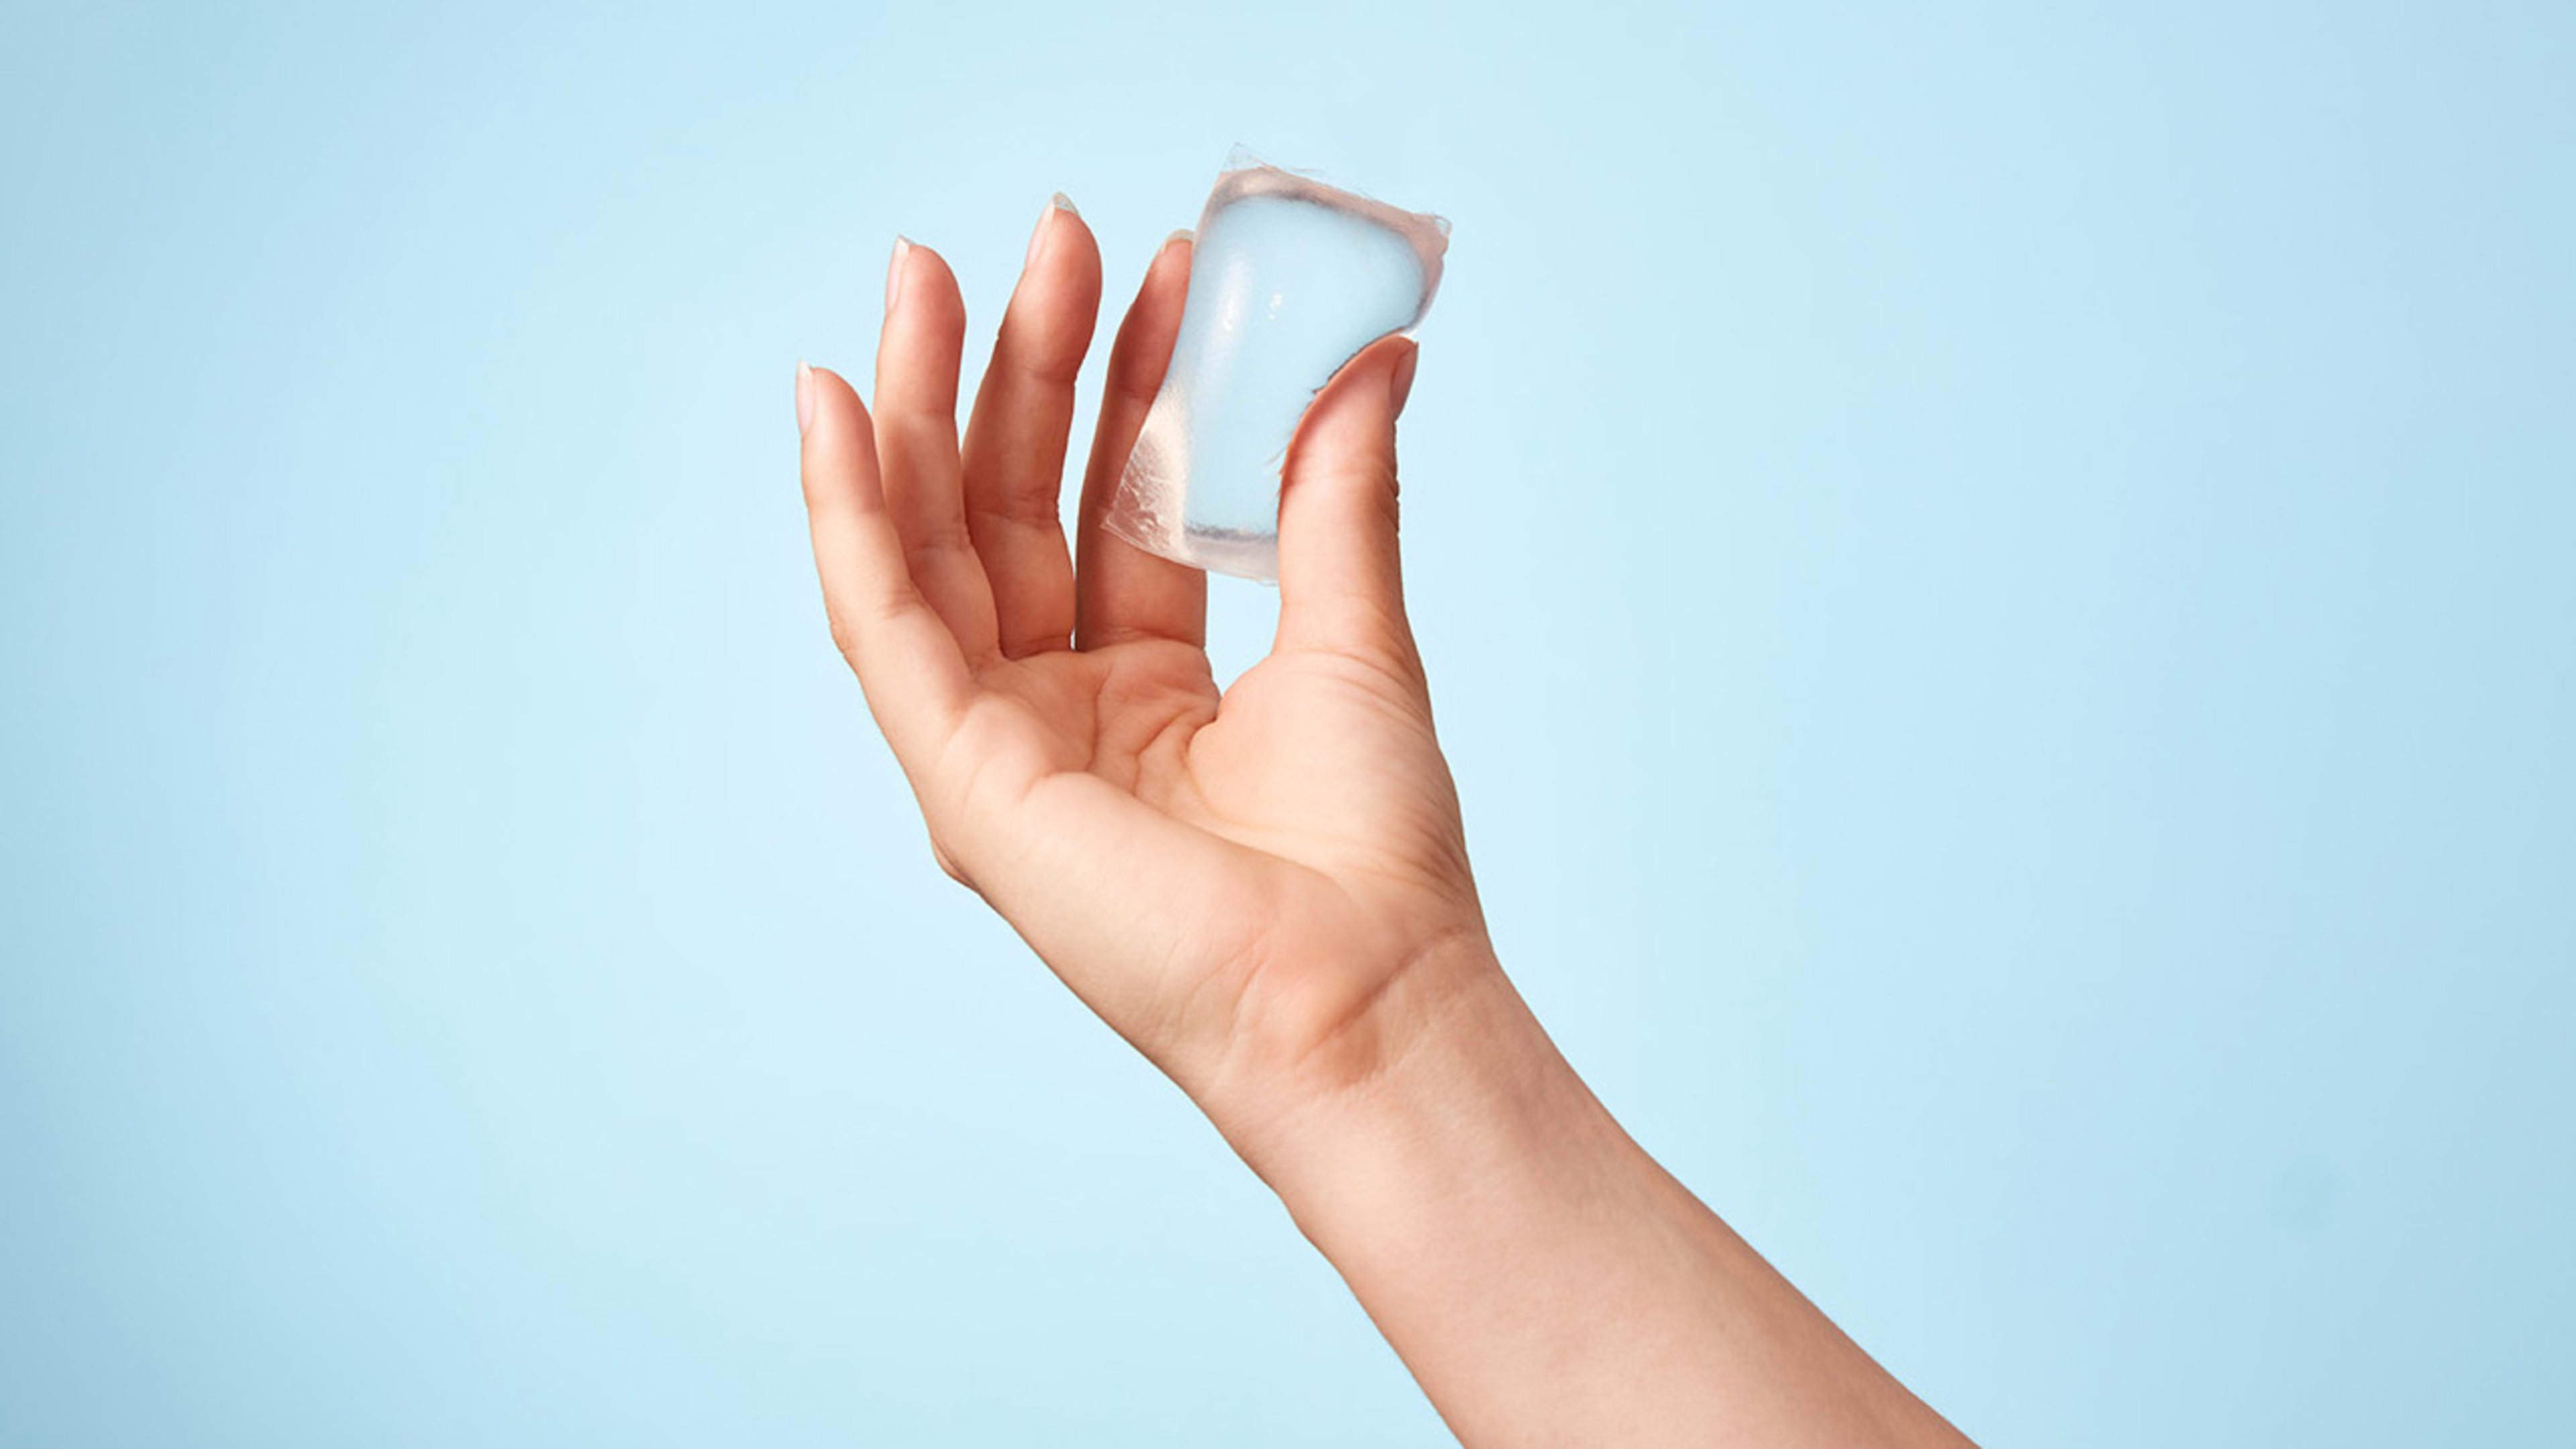 This edible blob filled with water means you don’t need a plastic bottle